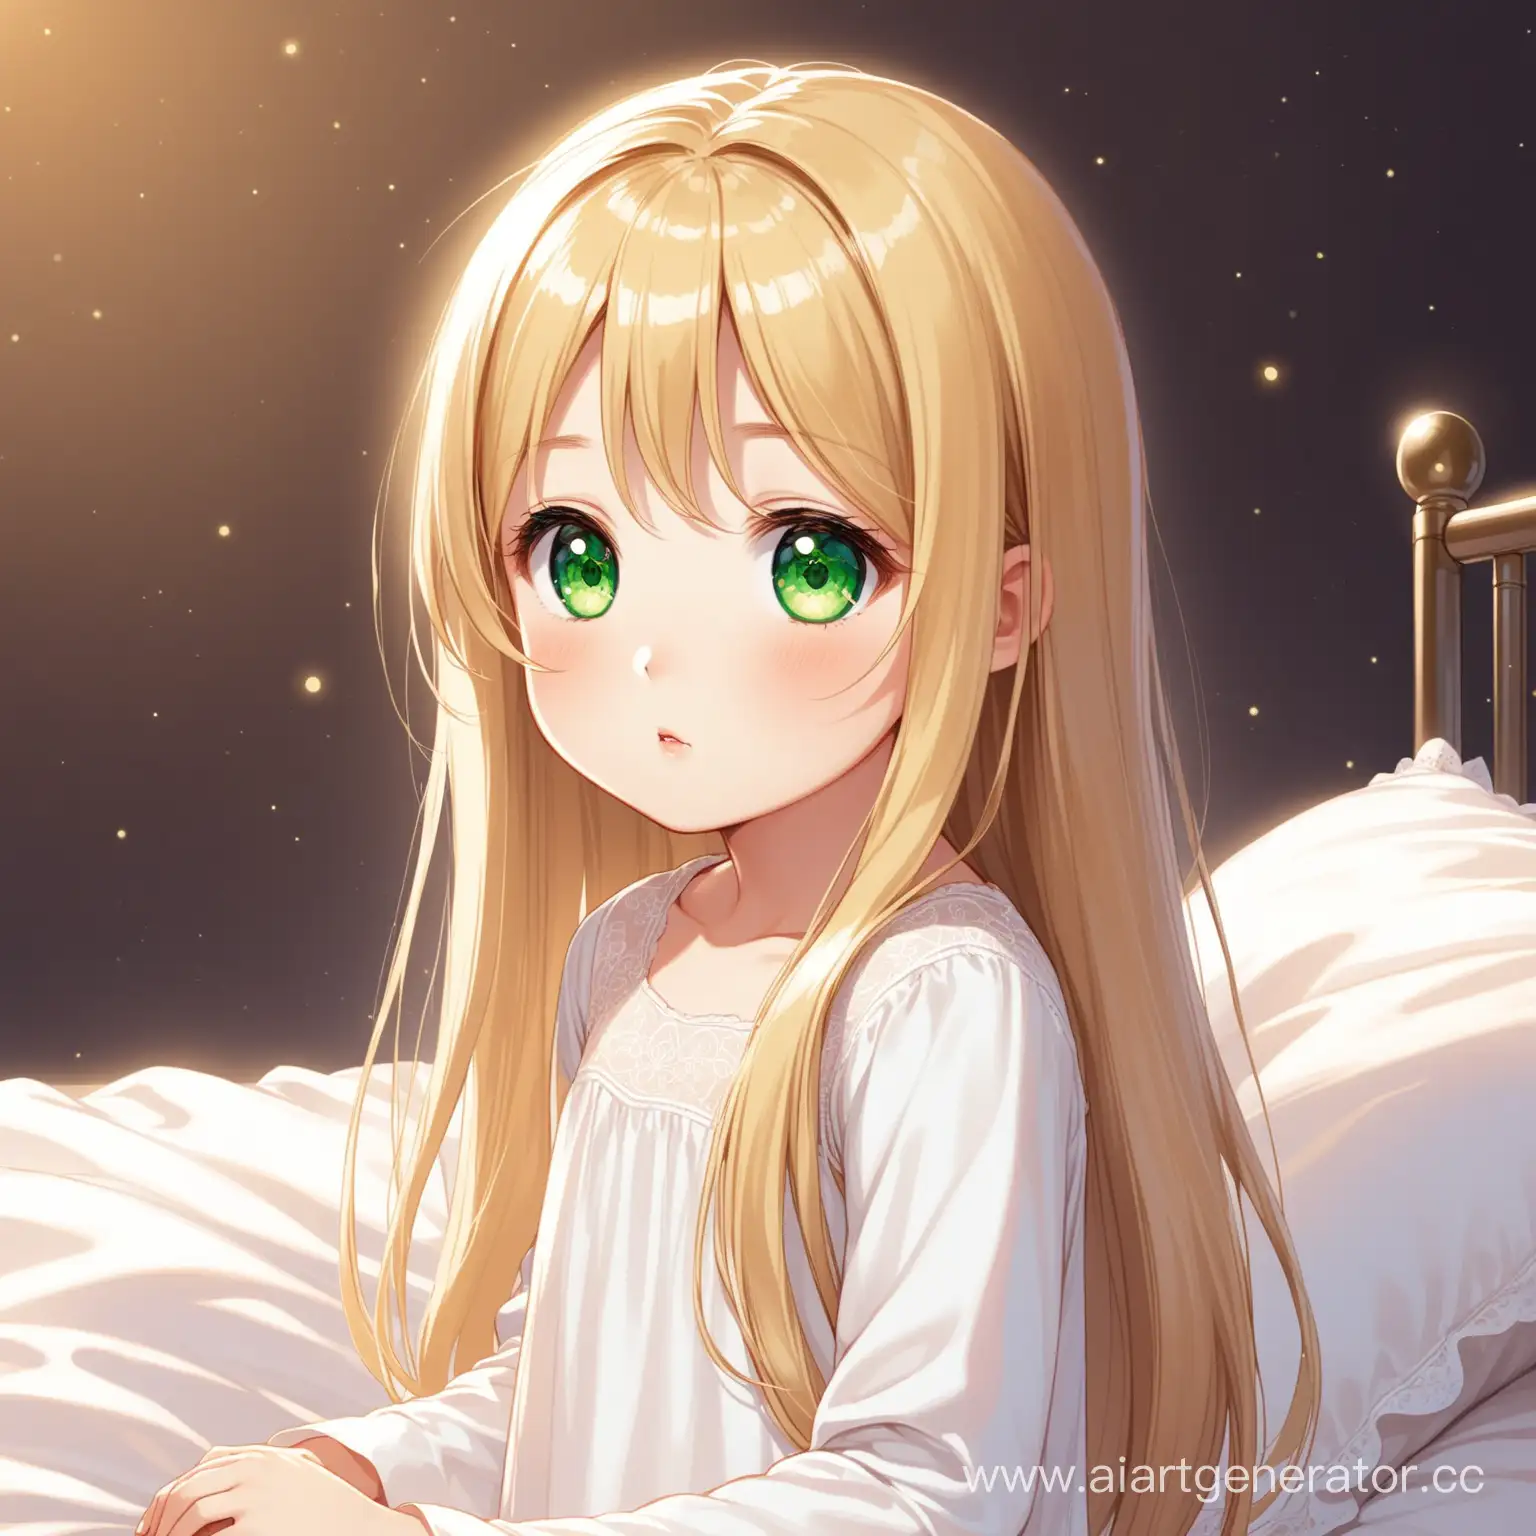 Little girl, She has long straight blond hair, big green eyes, She is wearing a white nightgown with long sleeves

